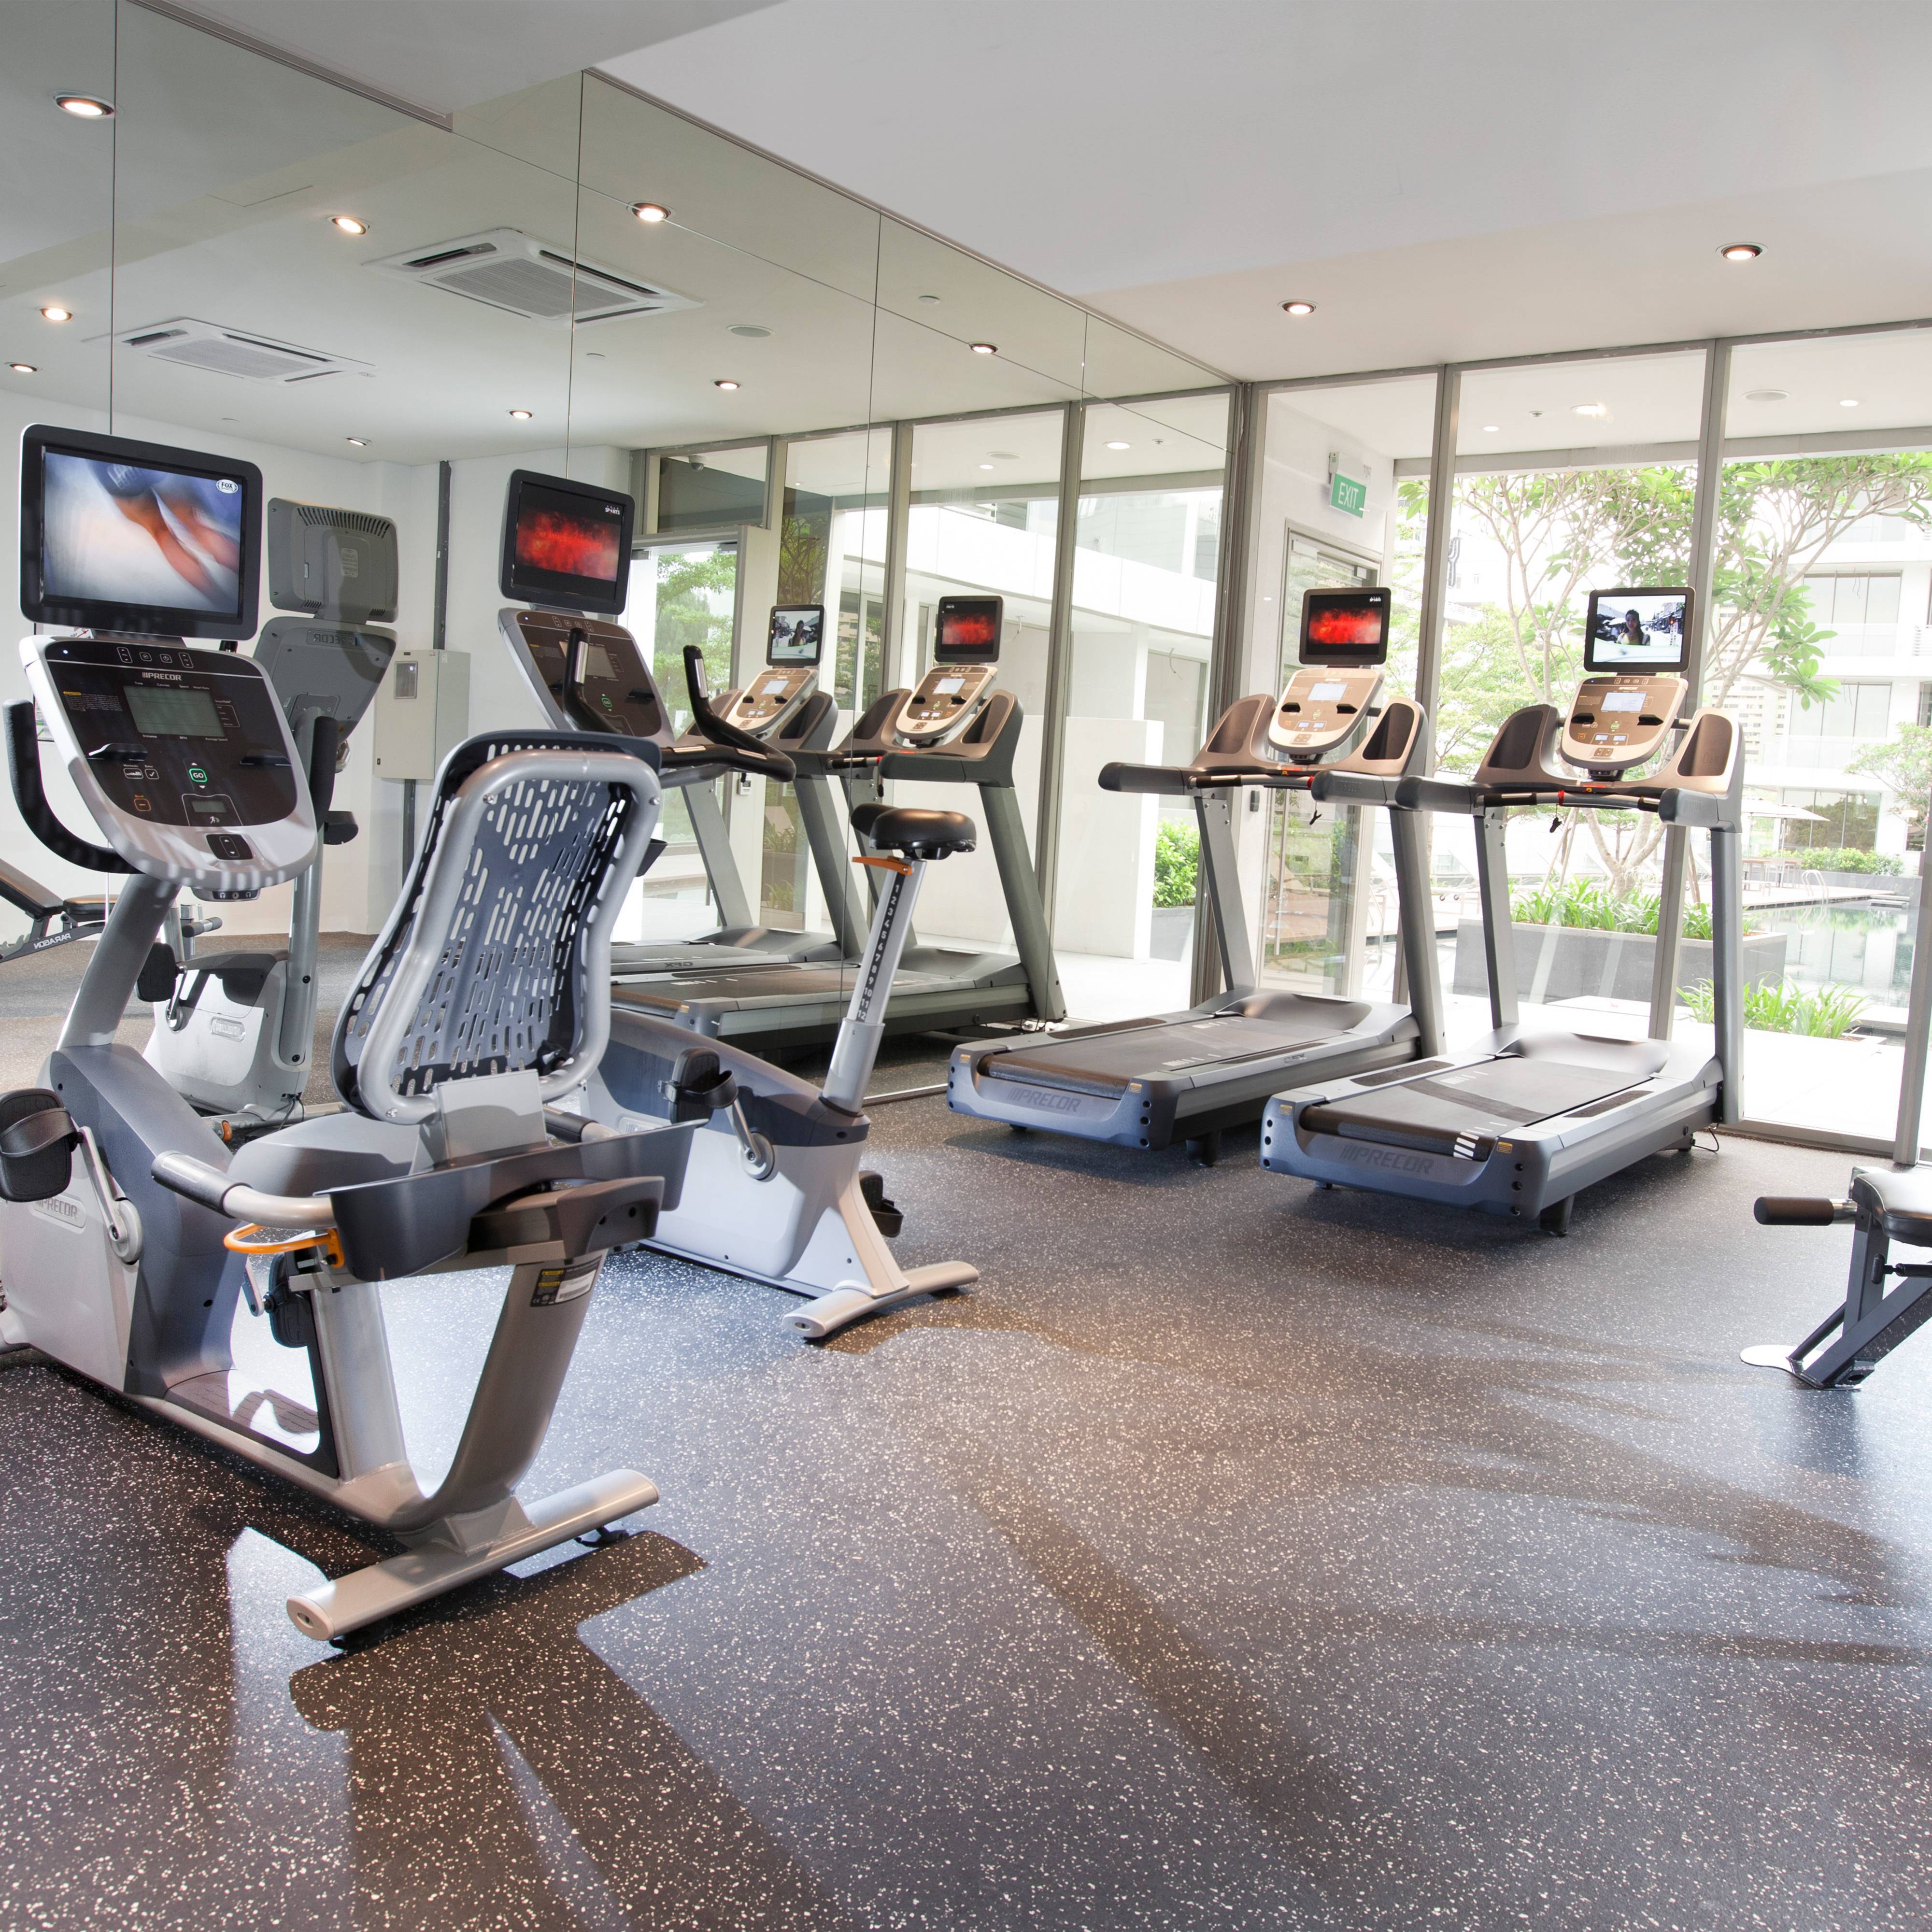 Fully equipped gymnasium - Unwind and recharge at our gymnasium